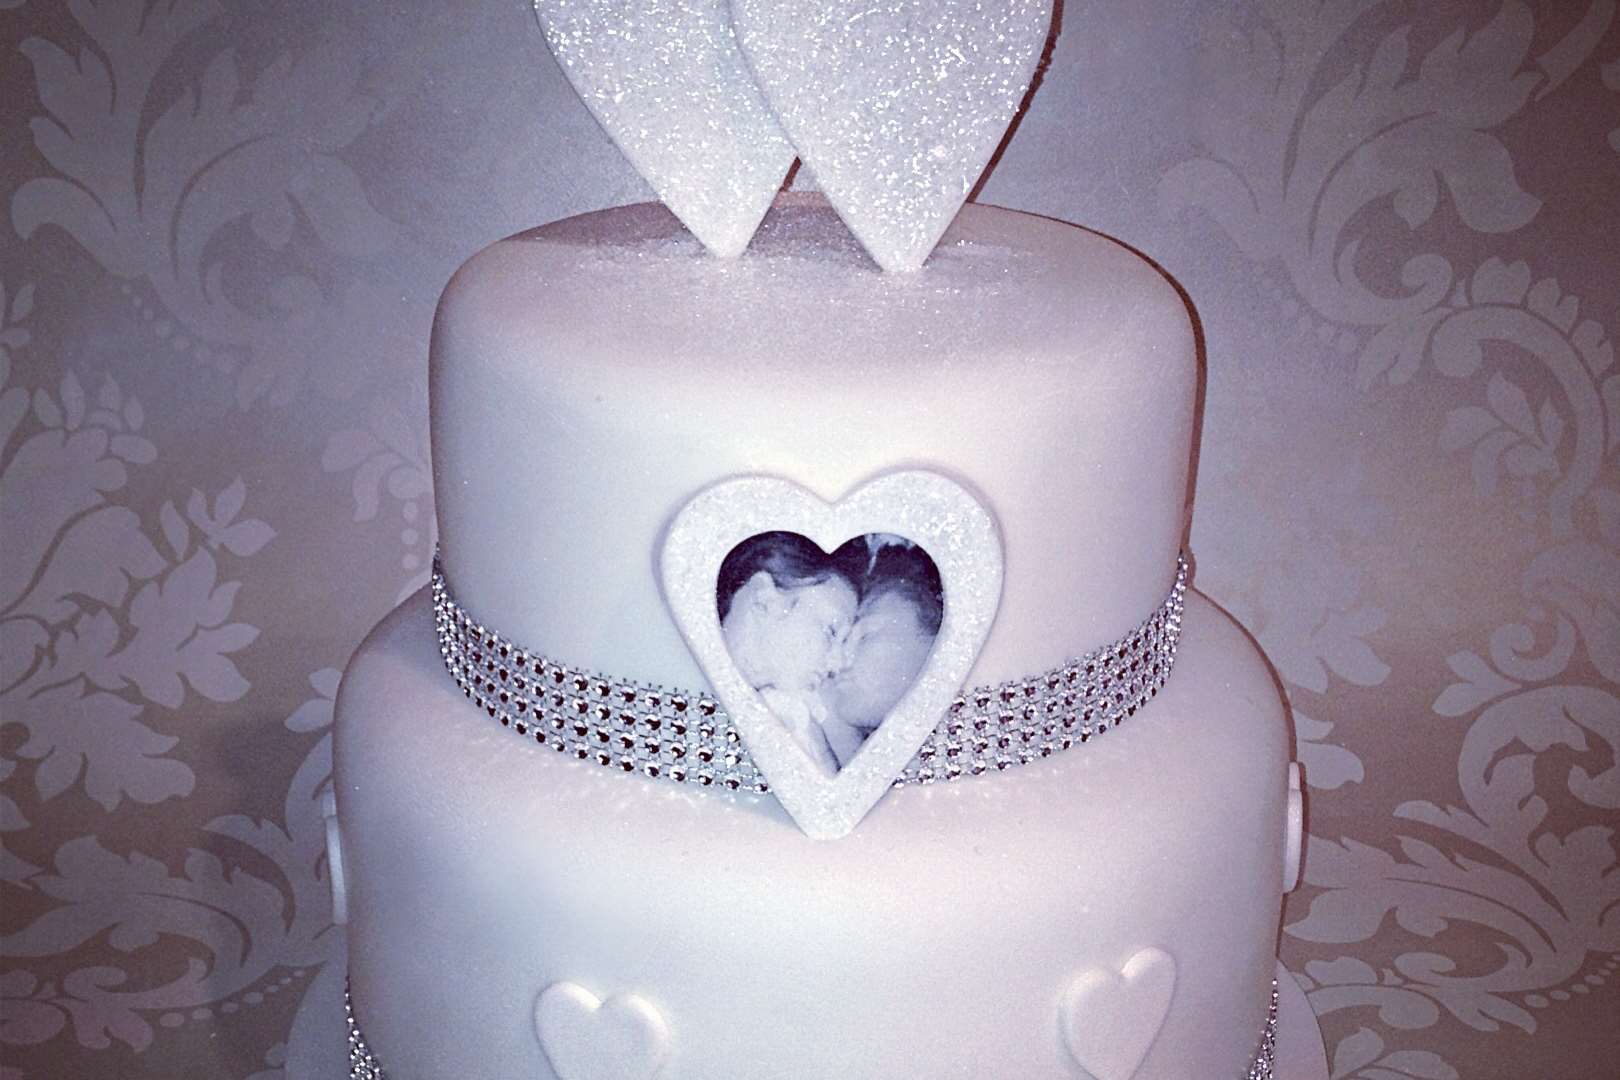 Mark and Michelle Wright's engagement cake